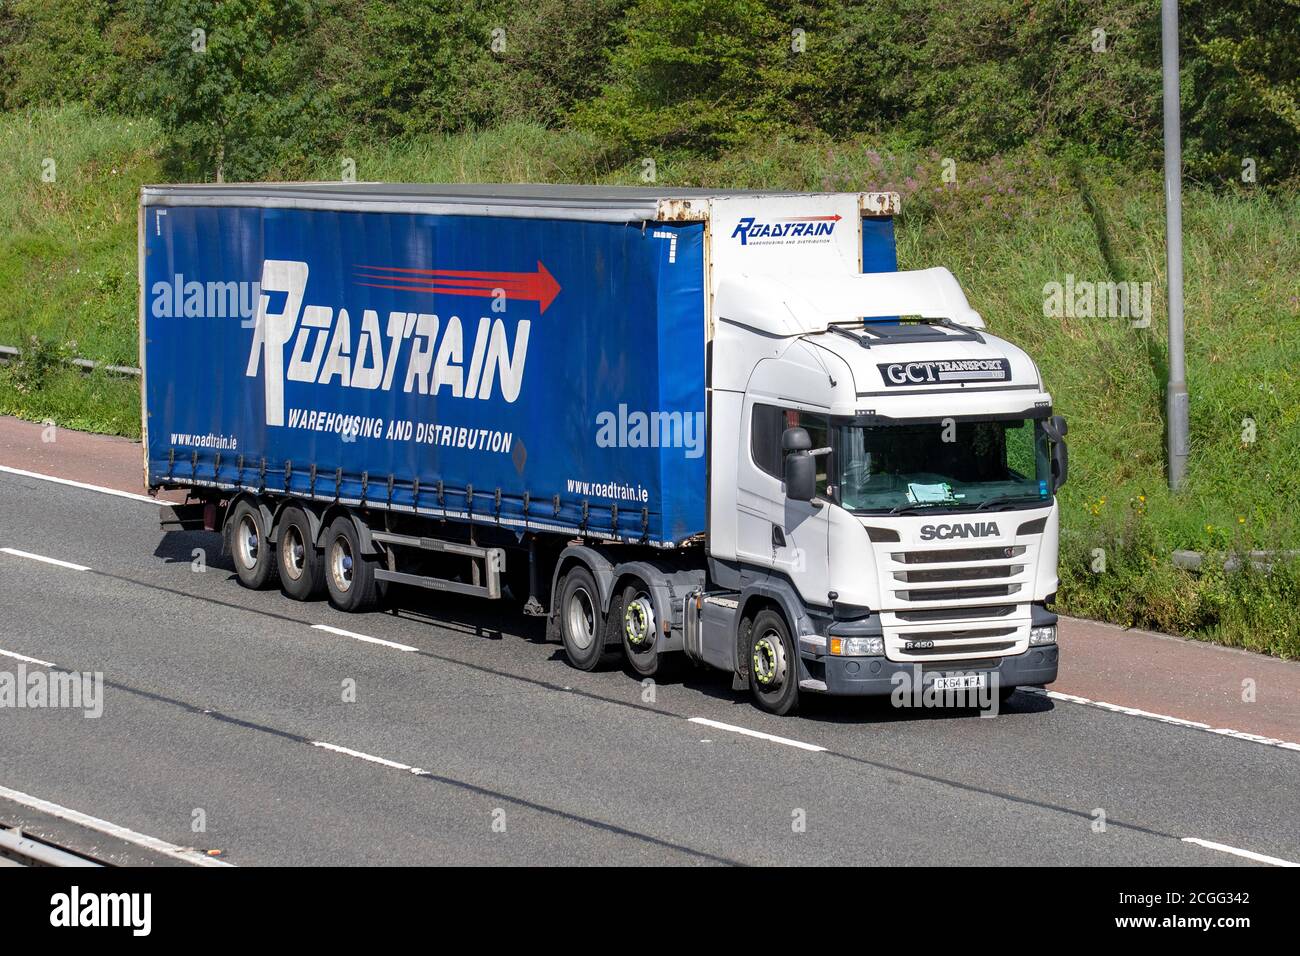 RoadTrain GCT Transport Ltd Haulage delivery trucks, lorry, transportation, truck, cargo carrier, vehicle, European commercial transport industry HGV, M6 at Manchester, UK Stock Photo